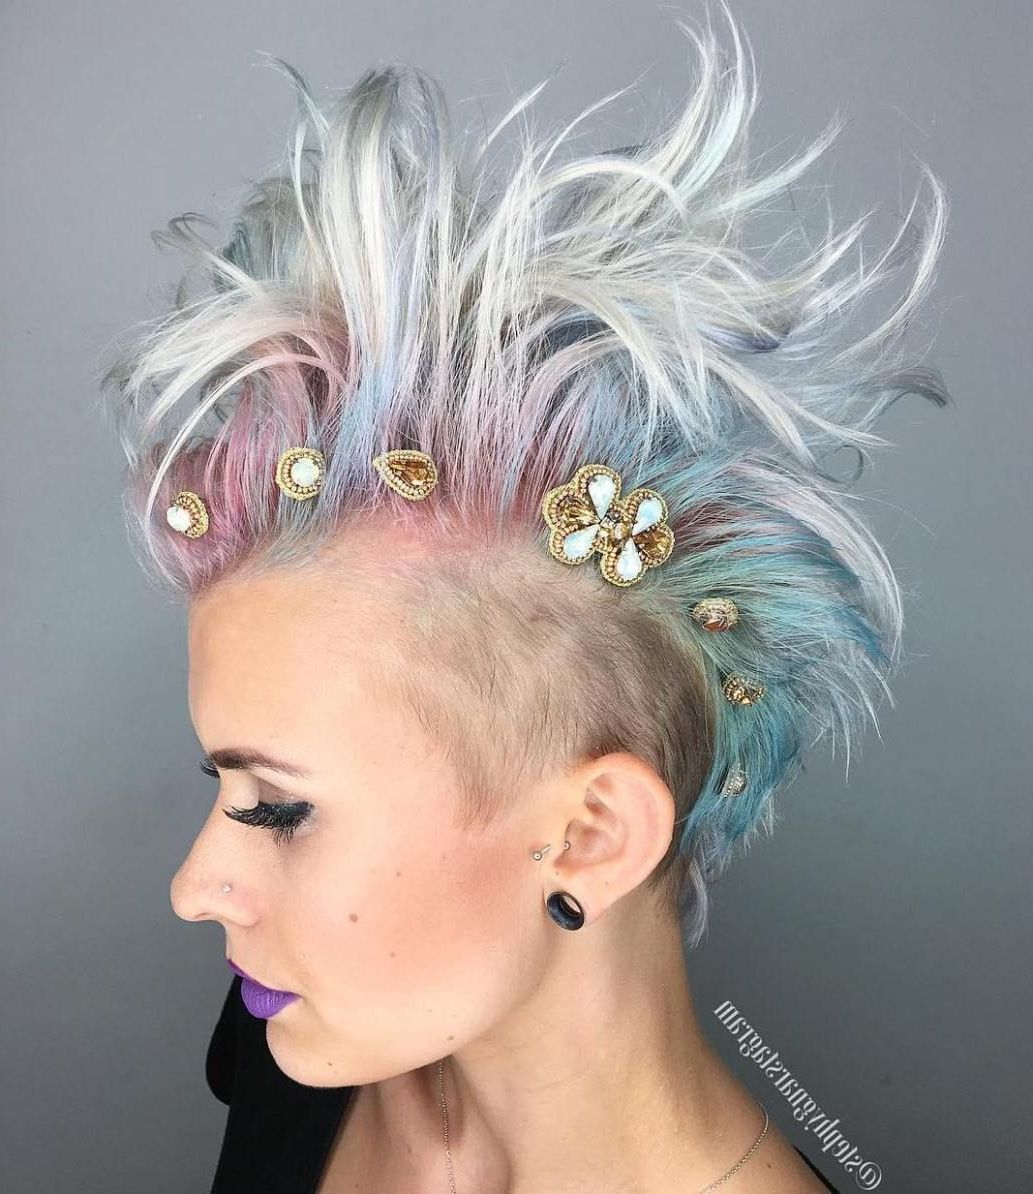 2018 Thrilling Fauxhawk Hairstyles For 50 Women's Undercut Hairstyles To Make A Real Statement In  (View 14 of 20)